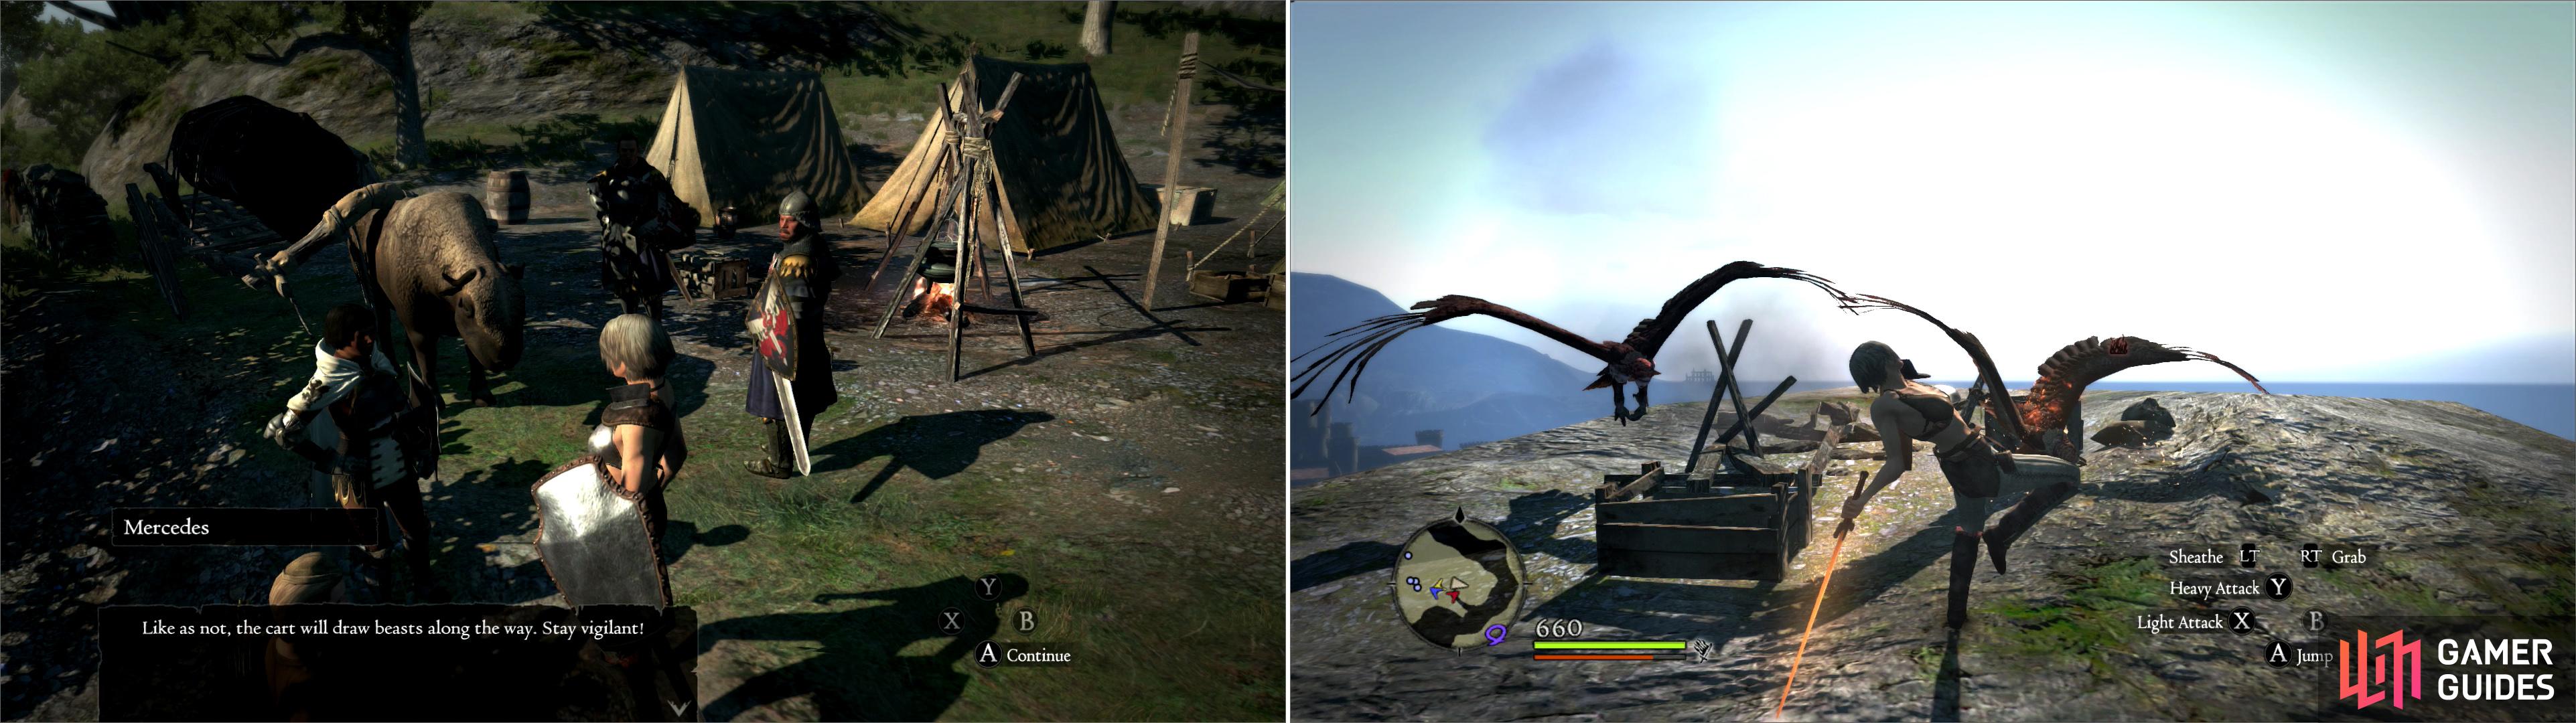 Navigate through Manamia Trail to reach the Mountain Waycastle, where Mercedes and the rest of the escort awaits (left). As Mercedes warns, monsters will be lured to the Hydra head, including the aerial nuisance, Harpies (right).